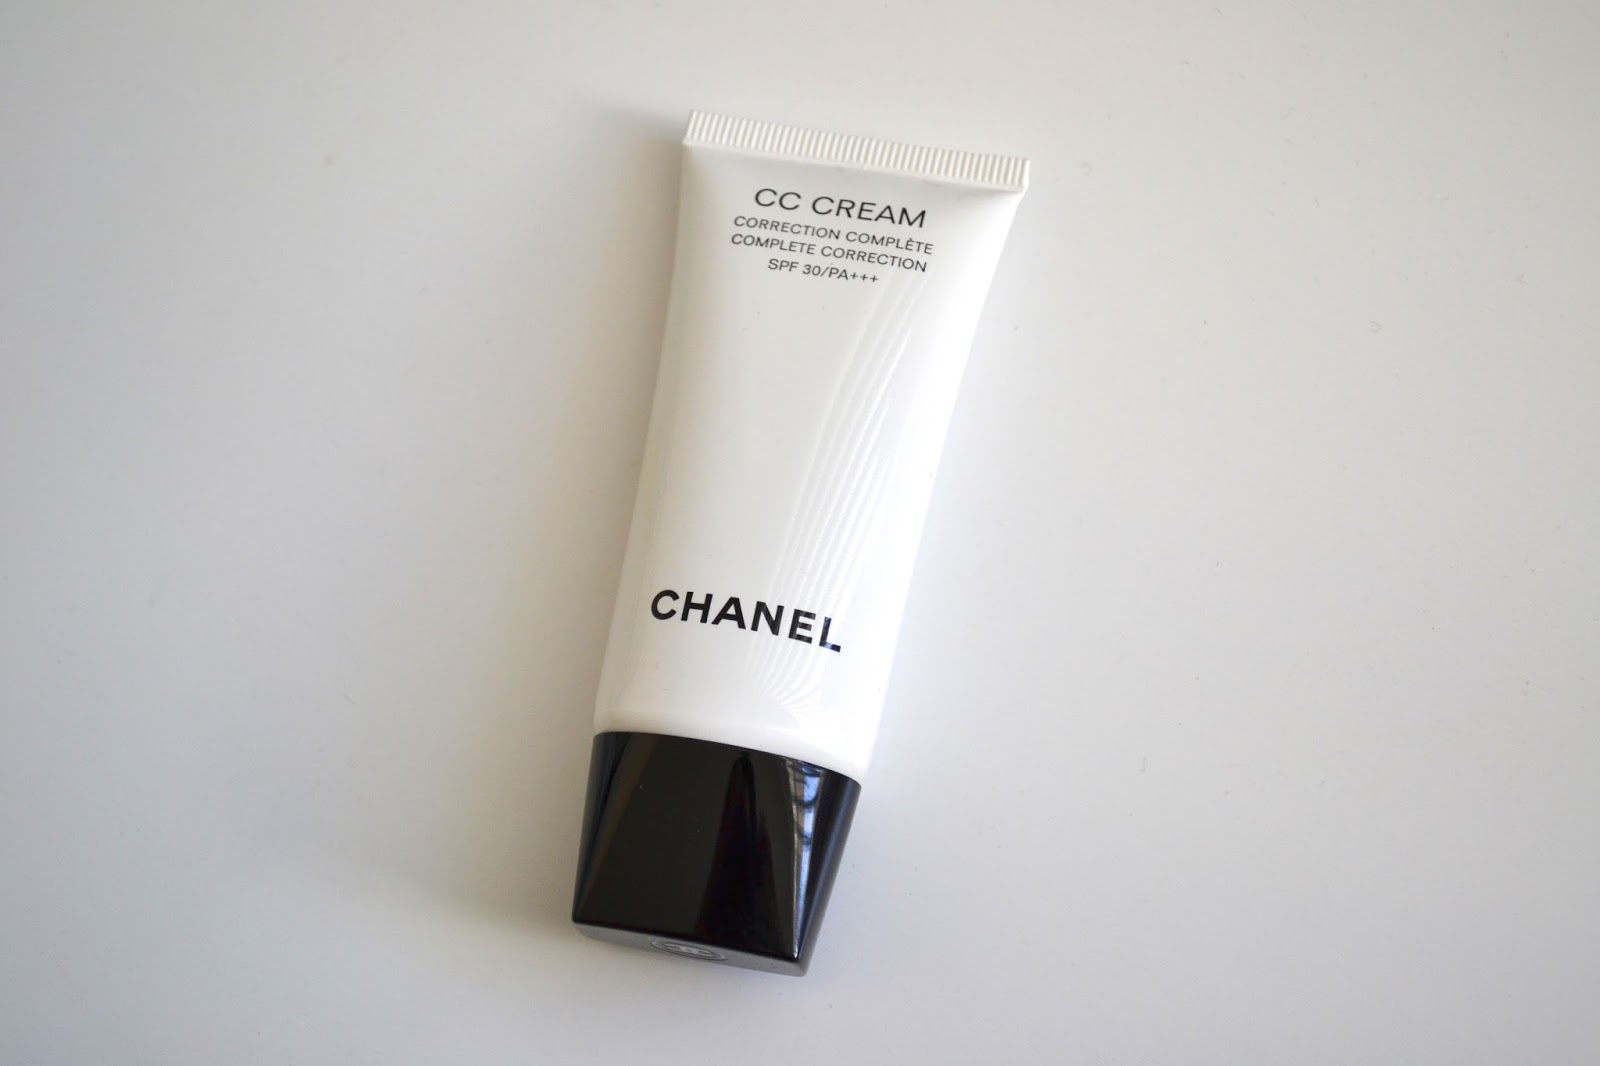 Aquaheart: Chanel CC Cream Complete Correction Sunscreen Broad Spectrum SPF  30 Beige - Review